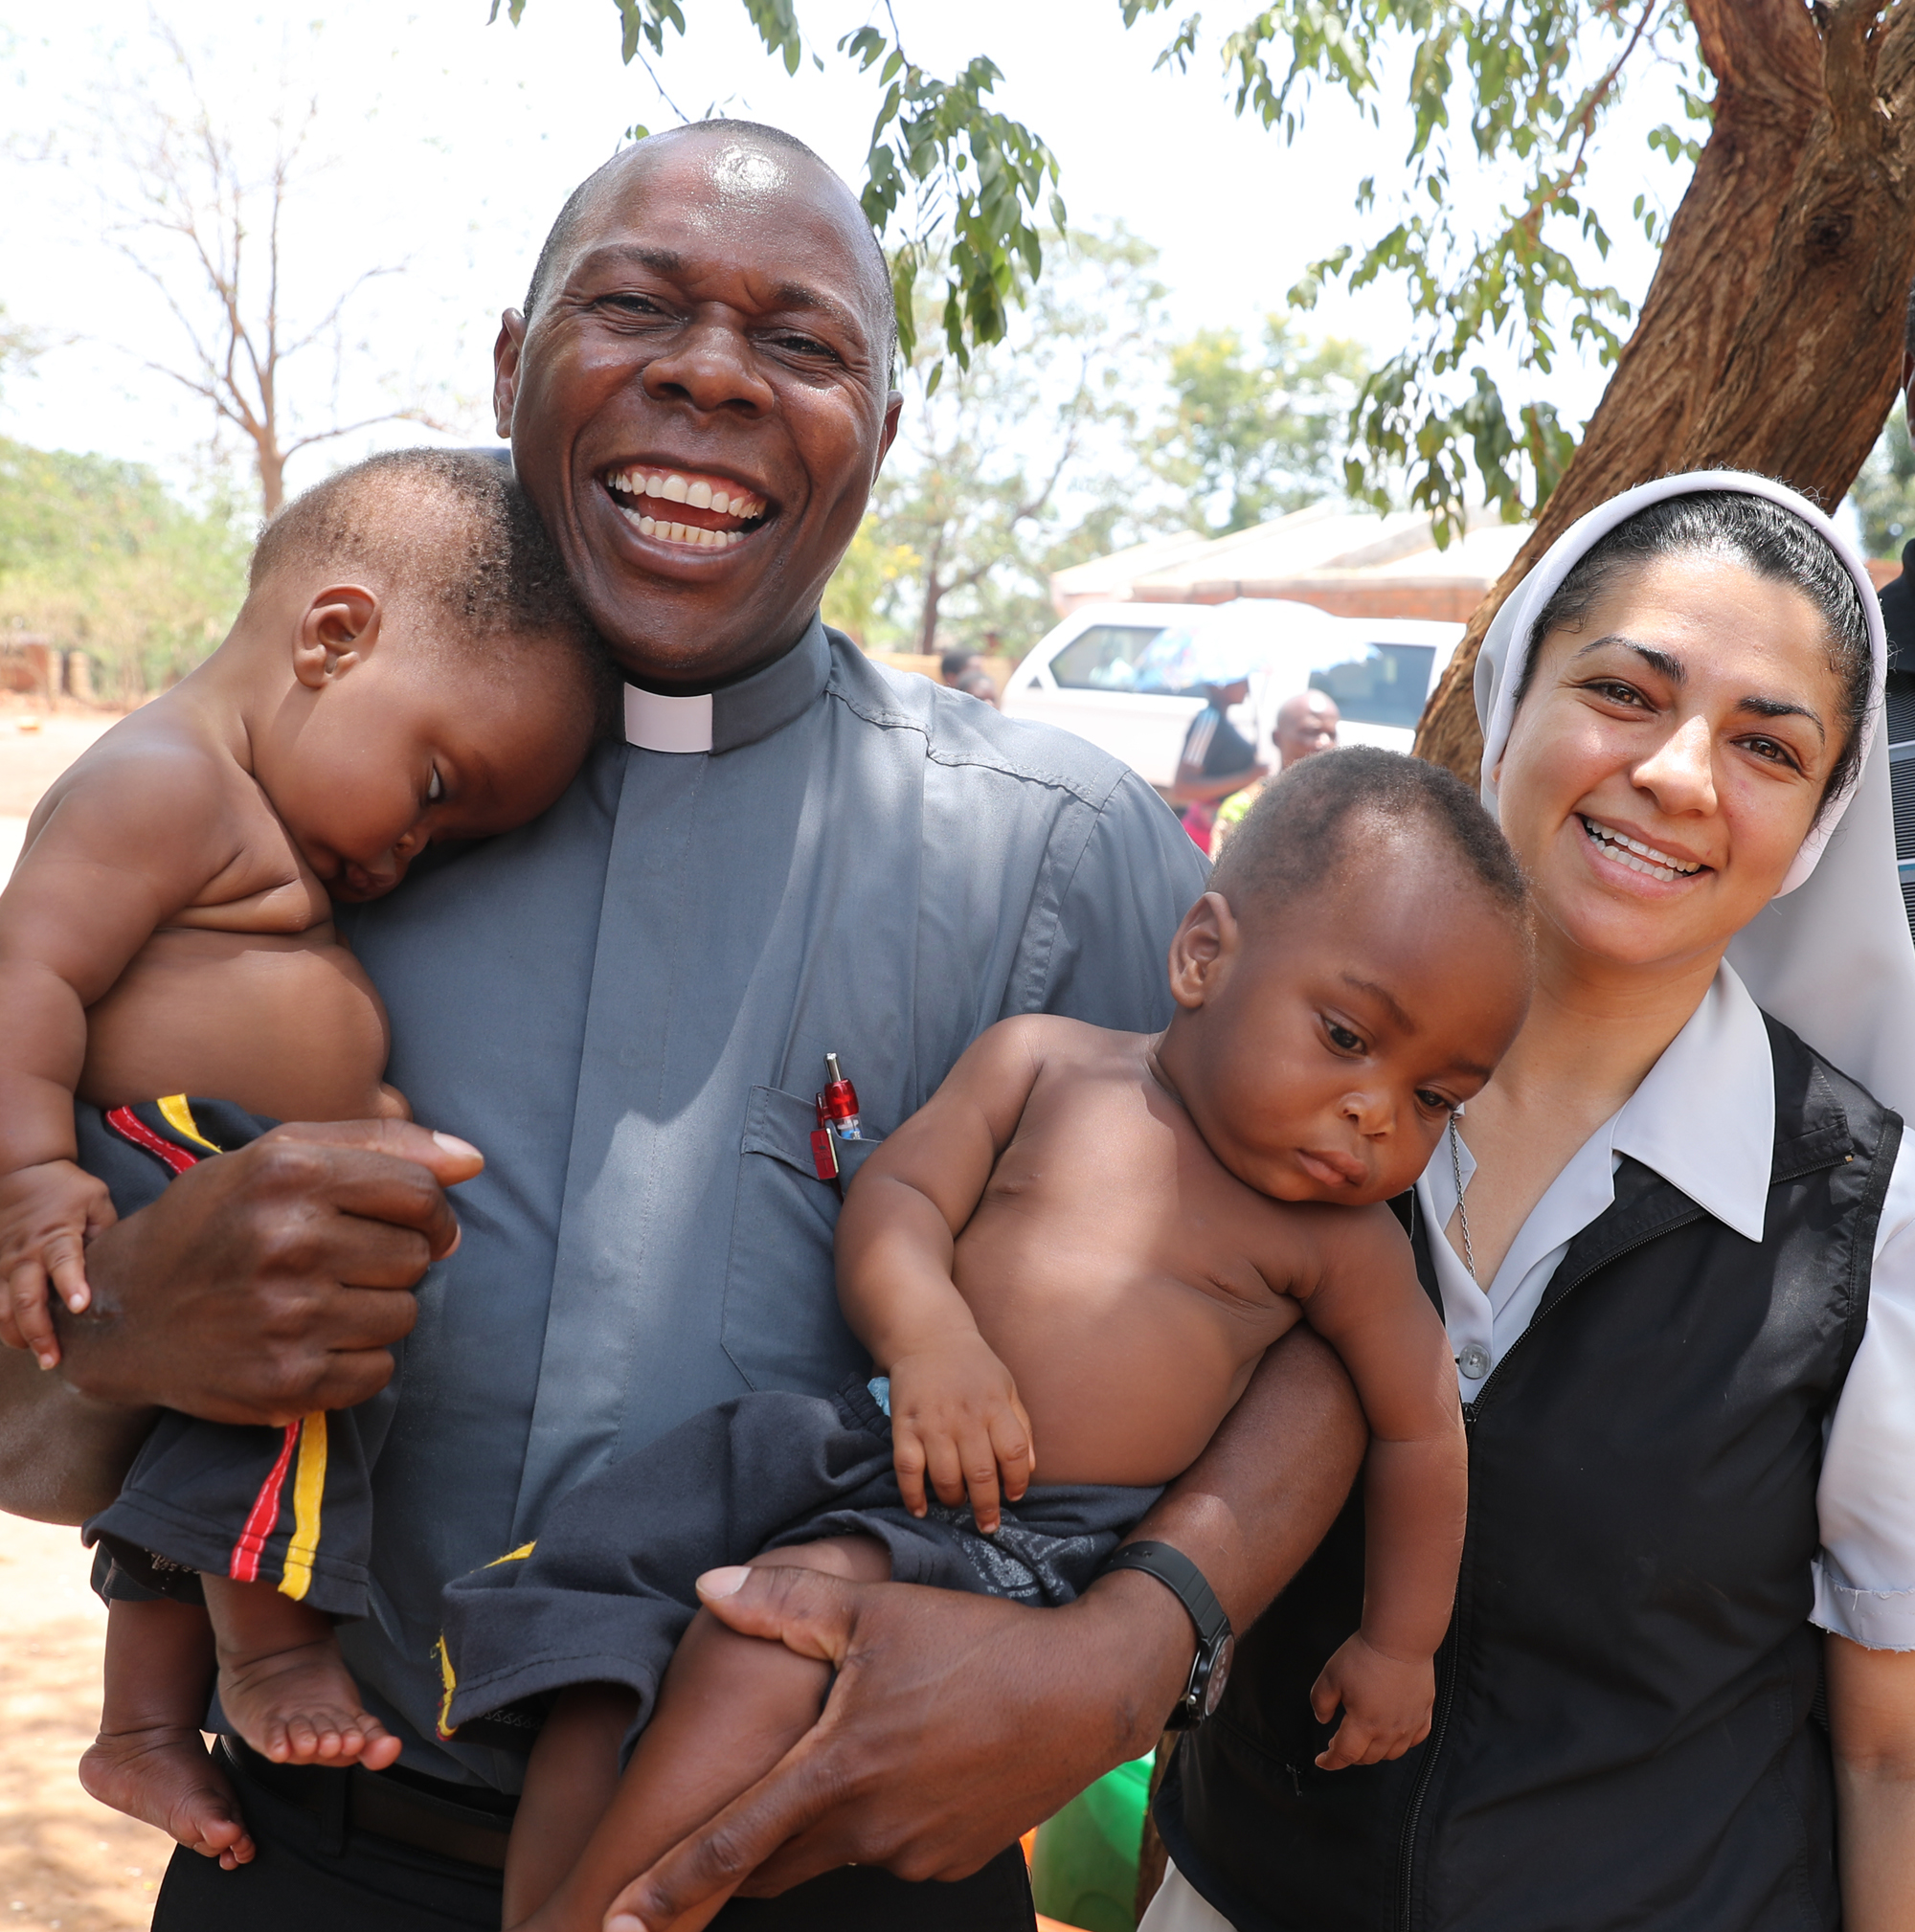 Fr Vincent, the National Director of Missio in Malawi with Sr Nilceia, at Lisanjala Health Clinic in Malawi